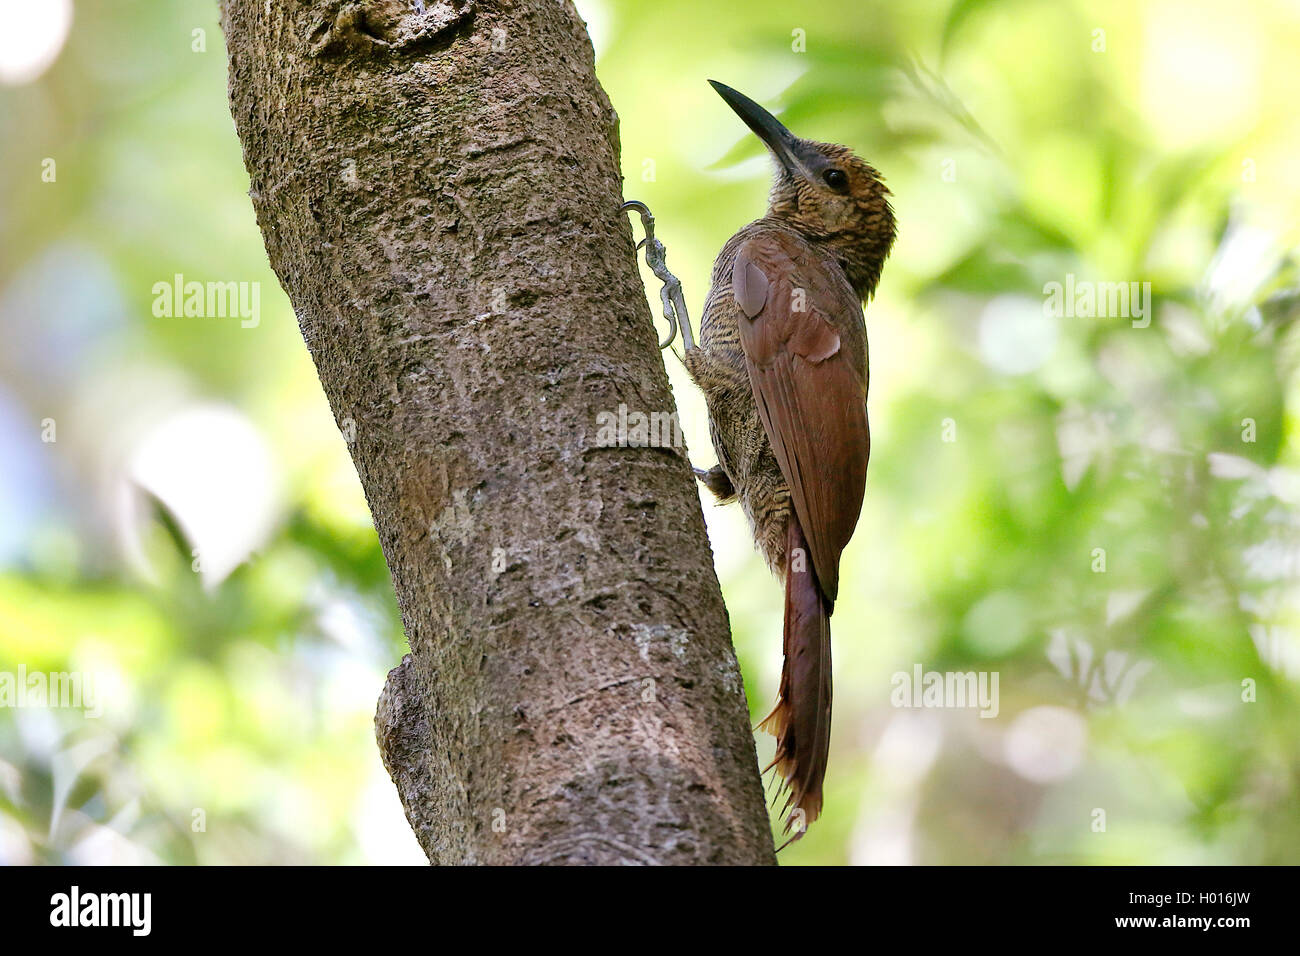 Northern barred woodcreeper (Dendrocolaptes sanctithomae), at a tree trunk, Costa Rica Stock Photo